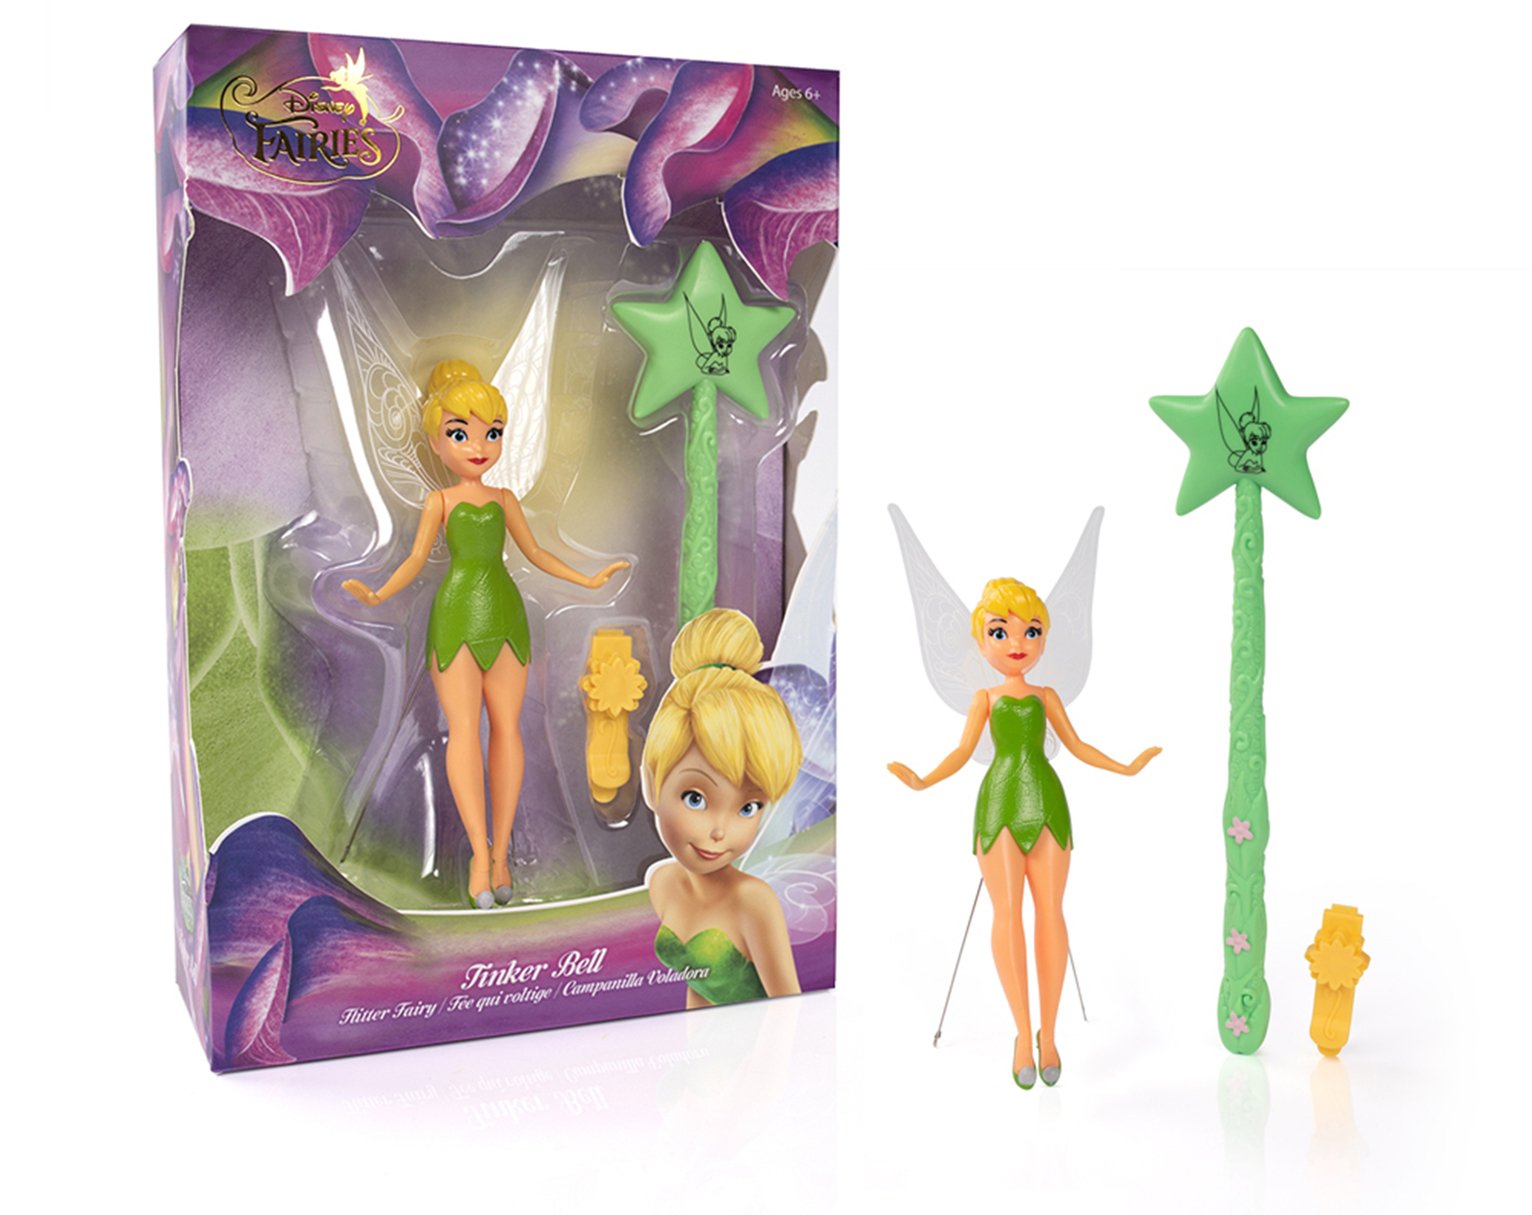 flying tinkerbell toy